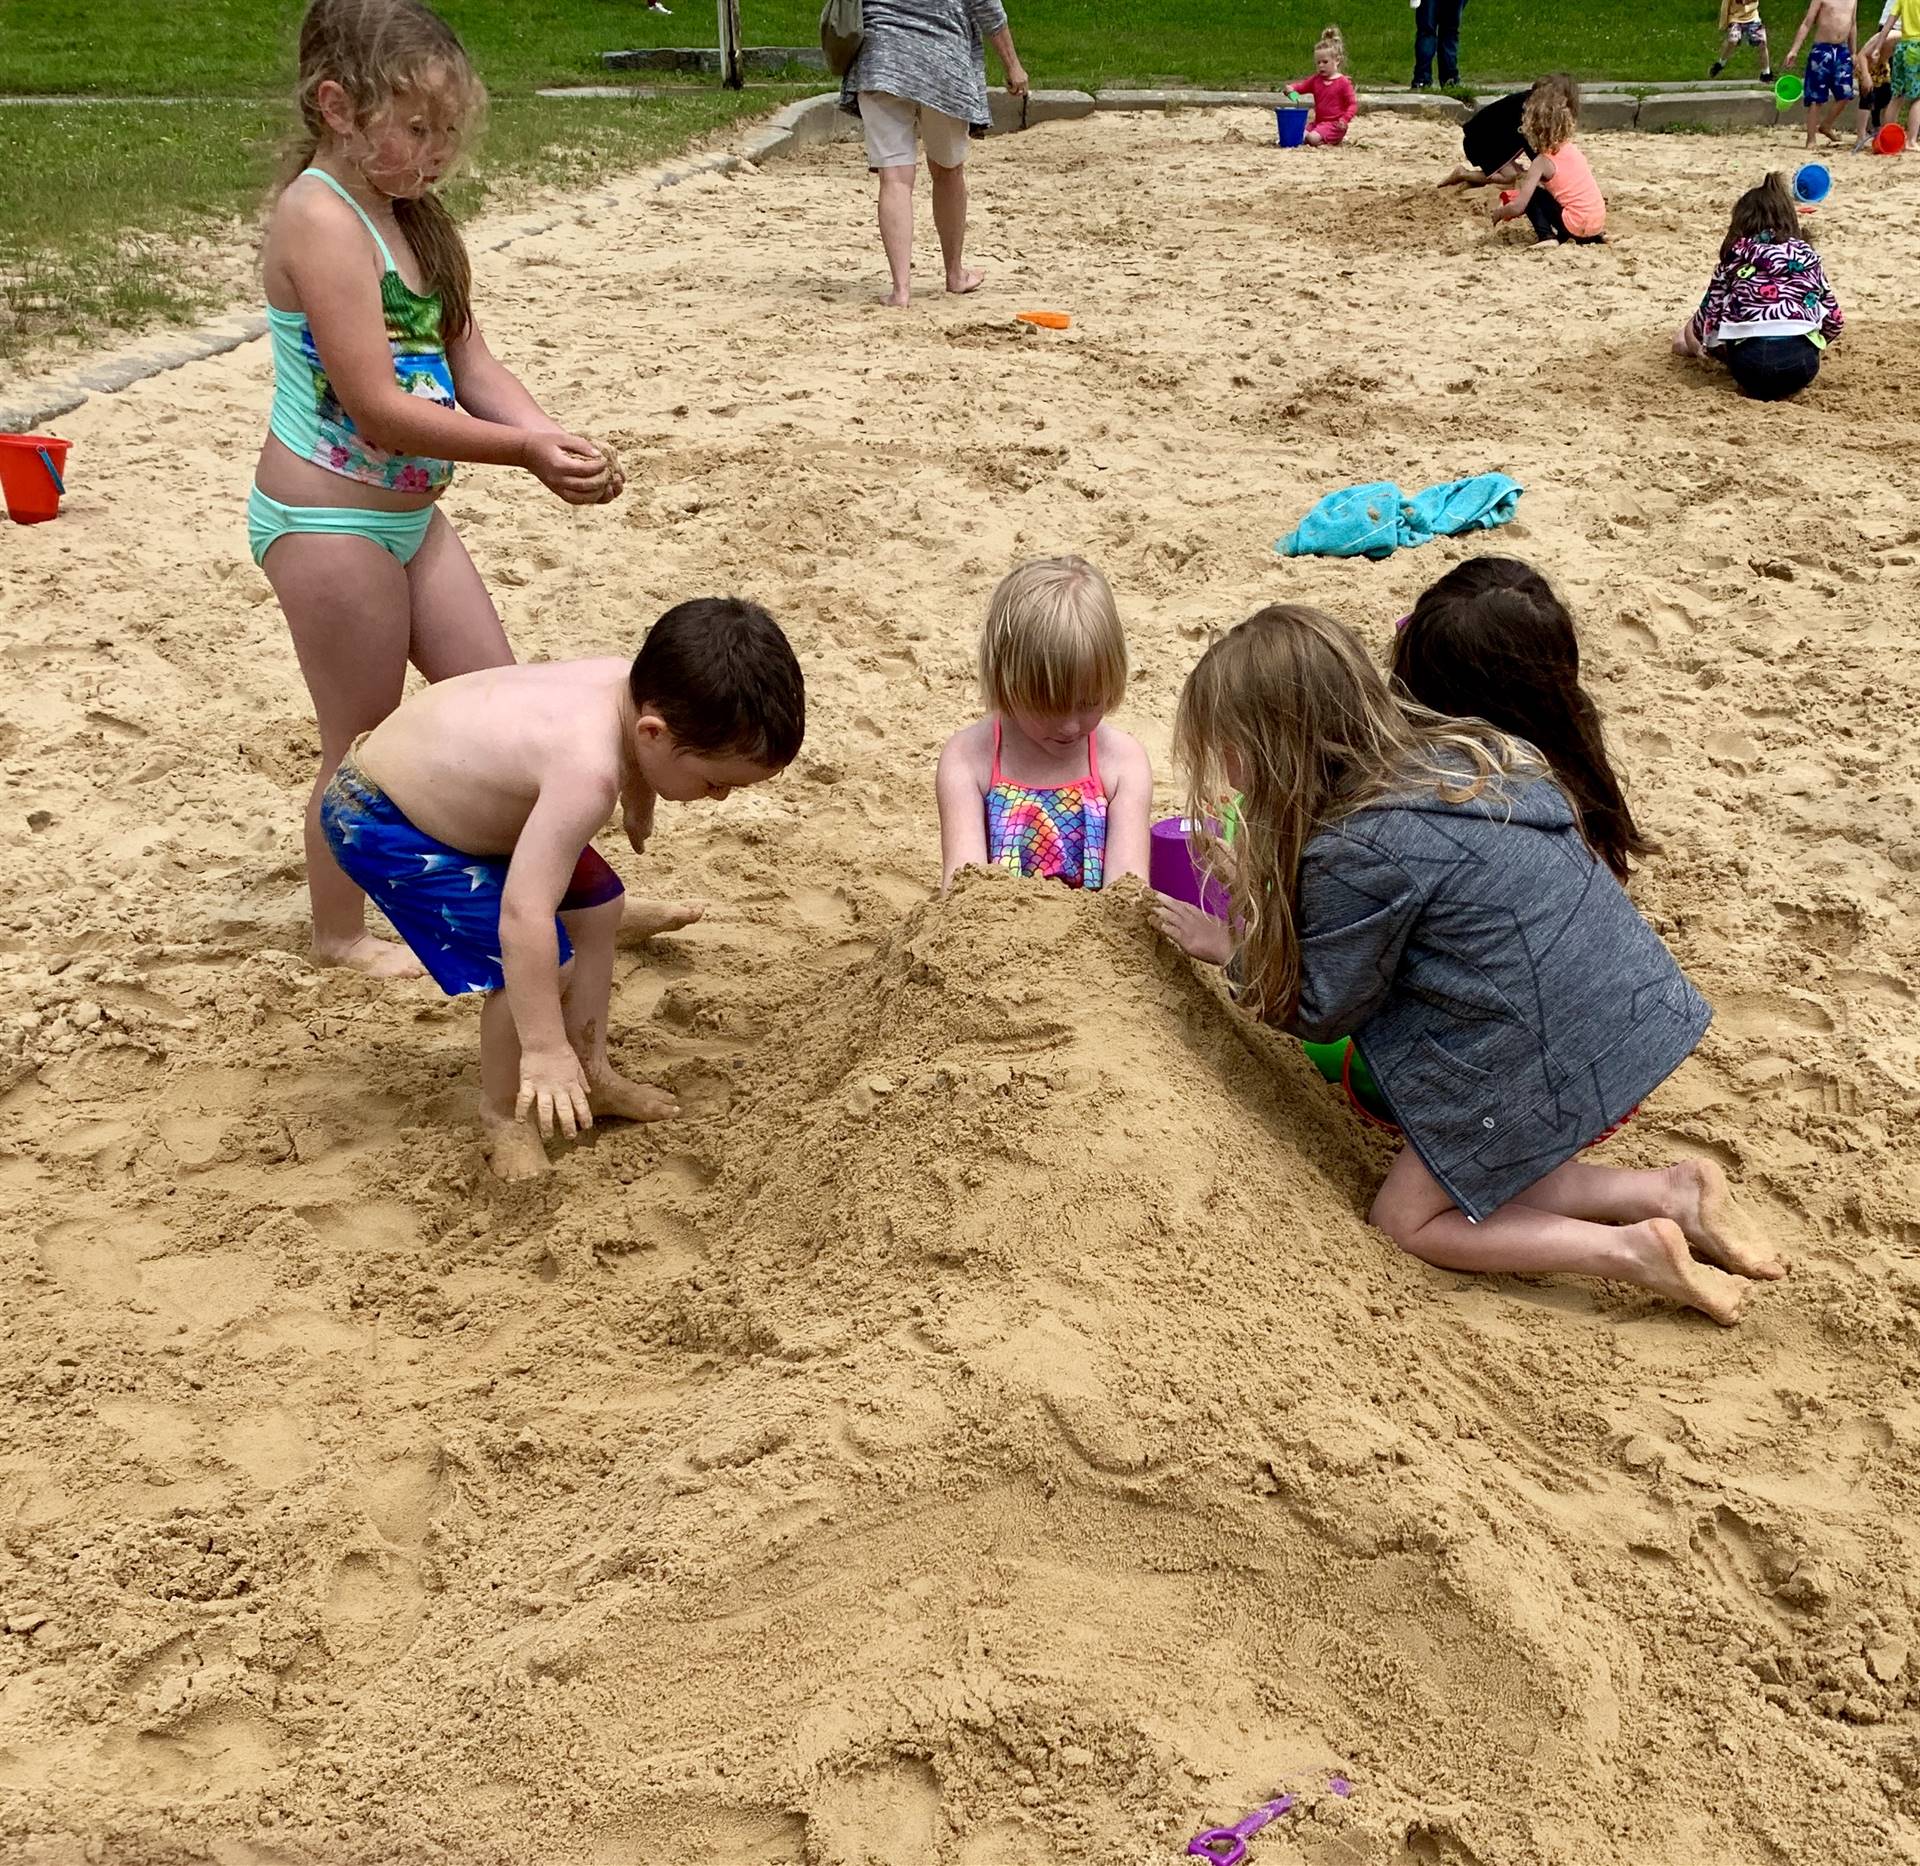 A group of student burying someone in sand.